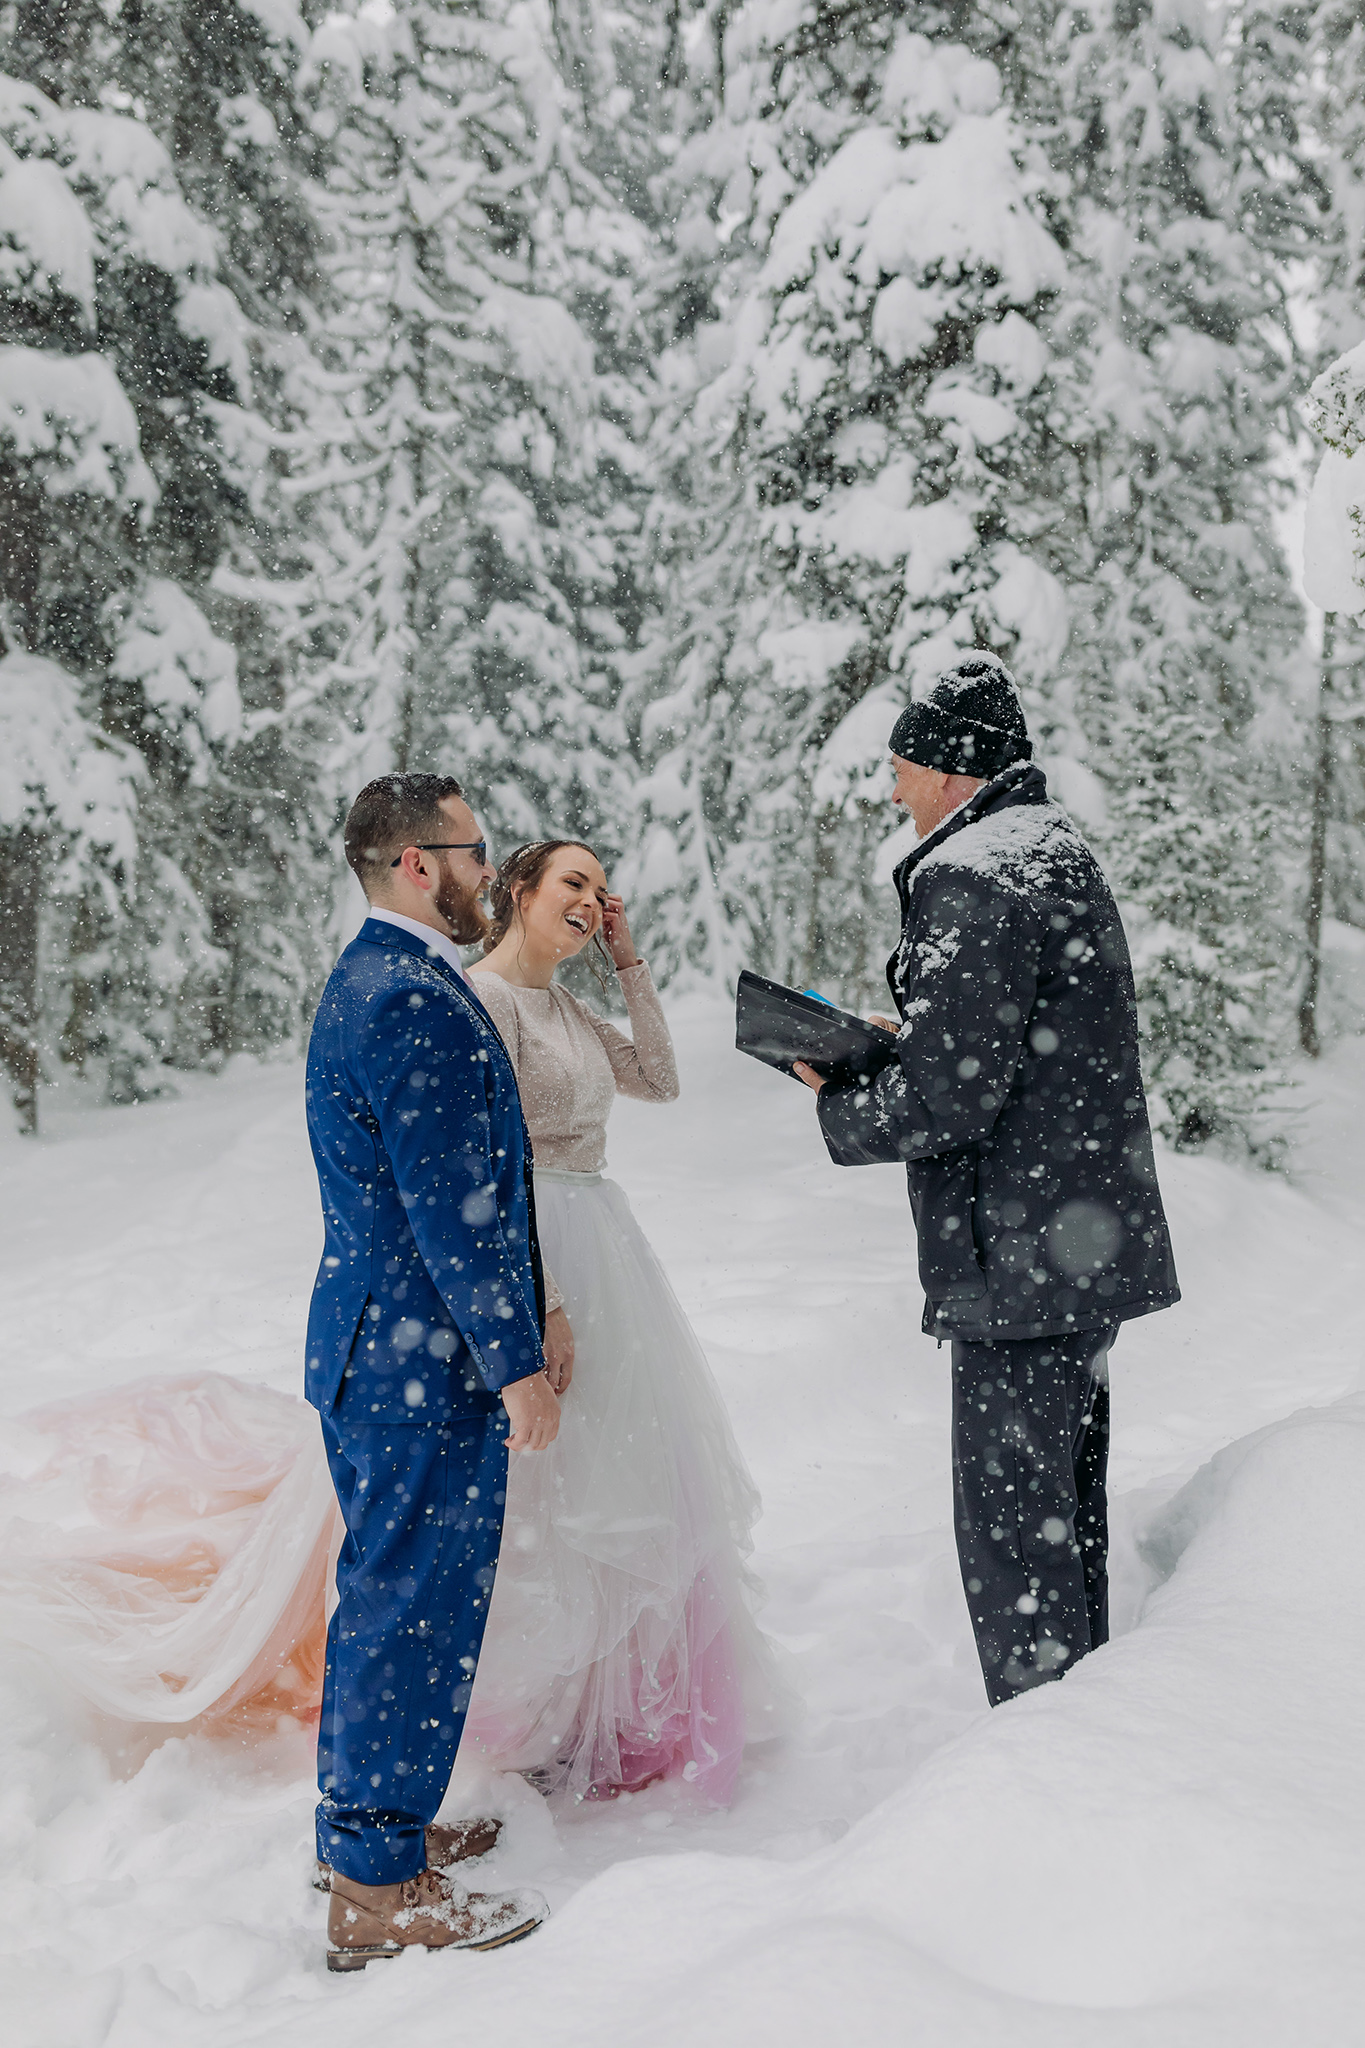 Elope in Lake Louise with a magical snowy outdoor winter wonderland wedding ceremony